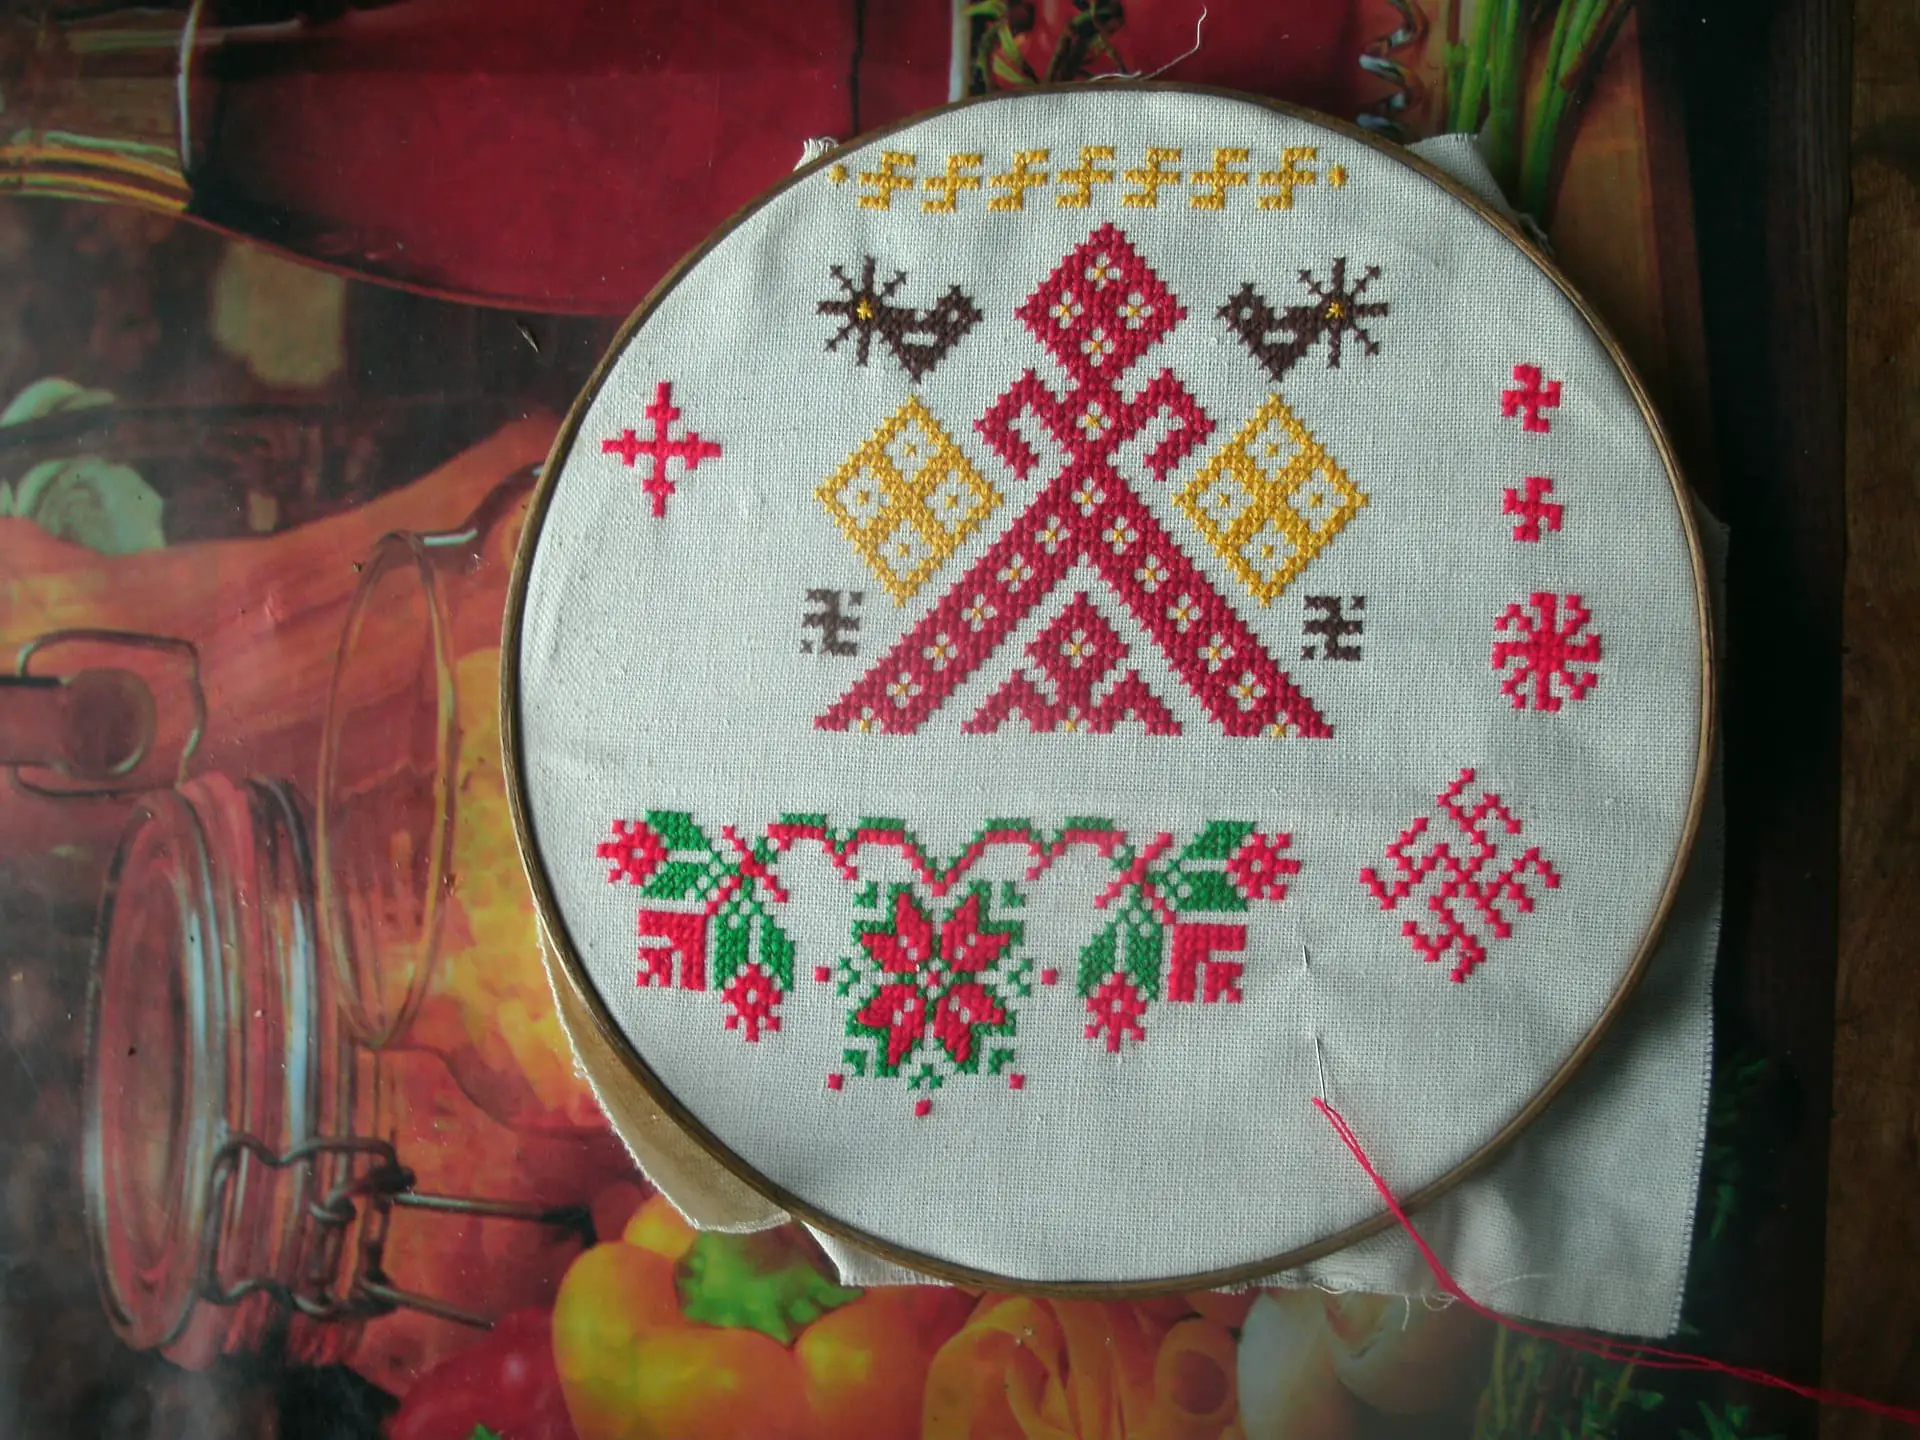 What Can You Use Instead of An Embroidery Hoop?